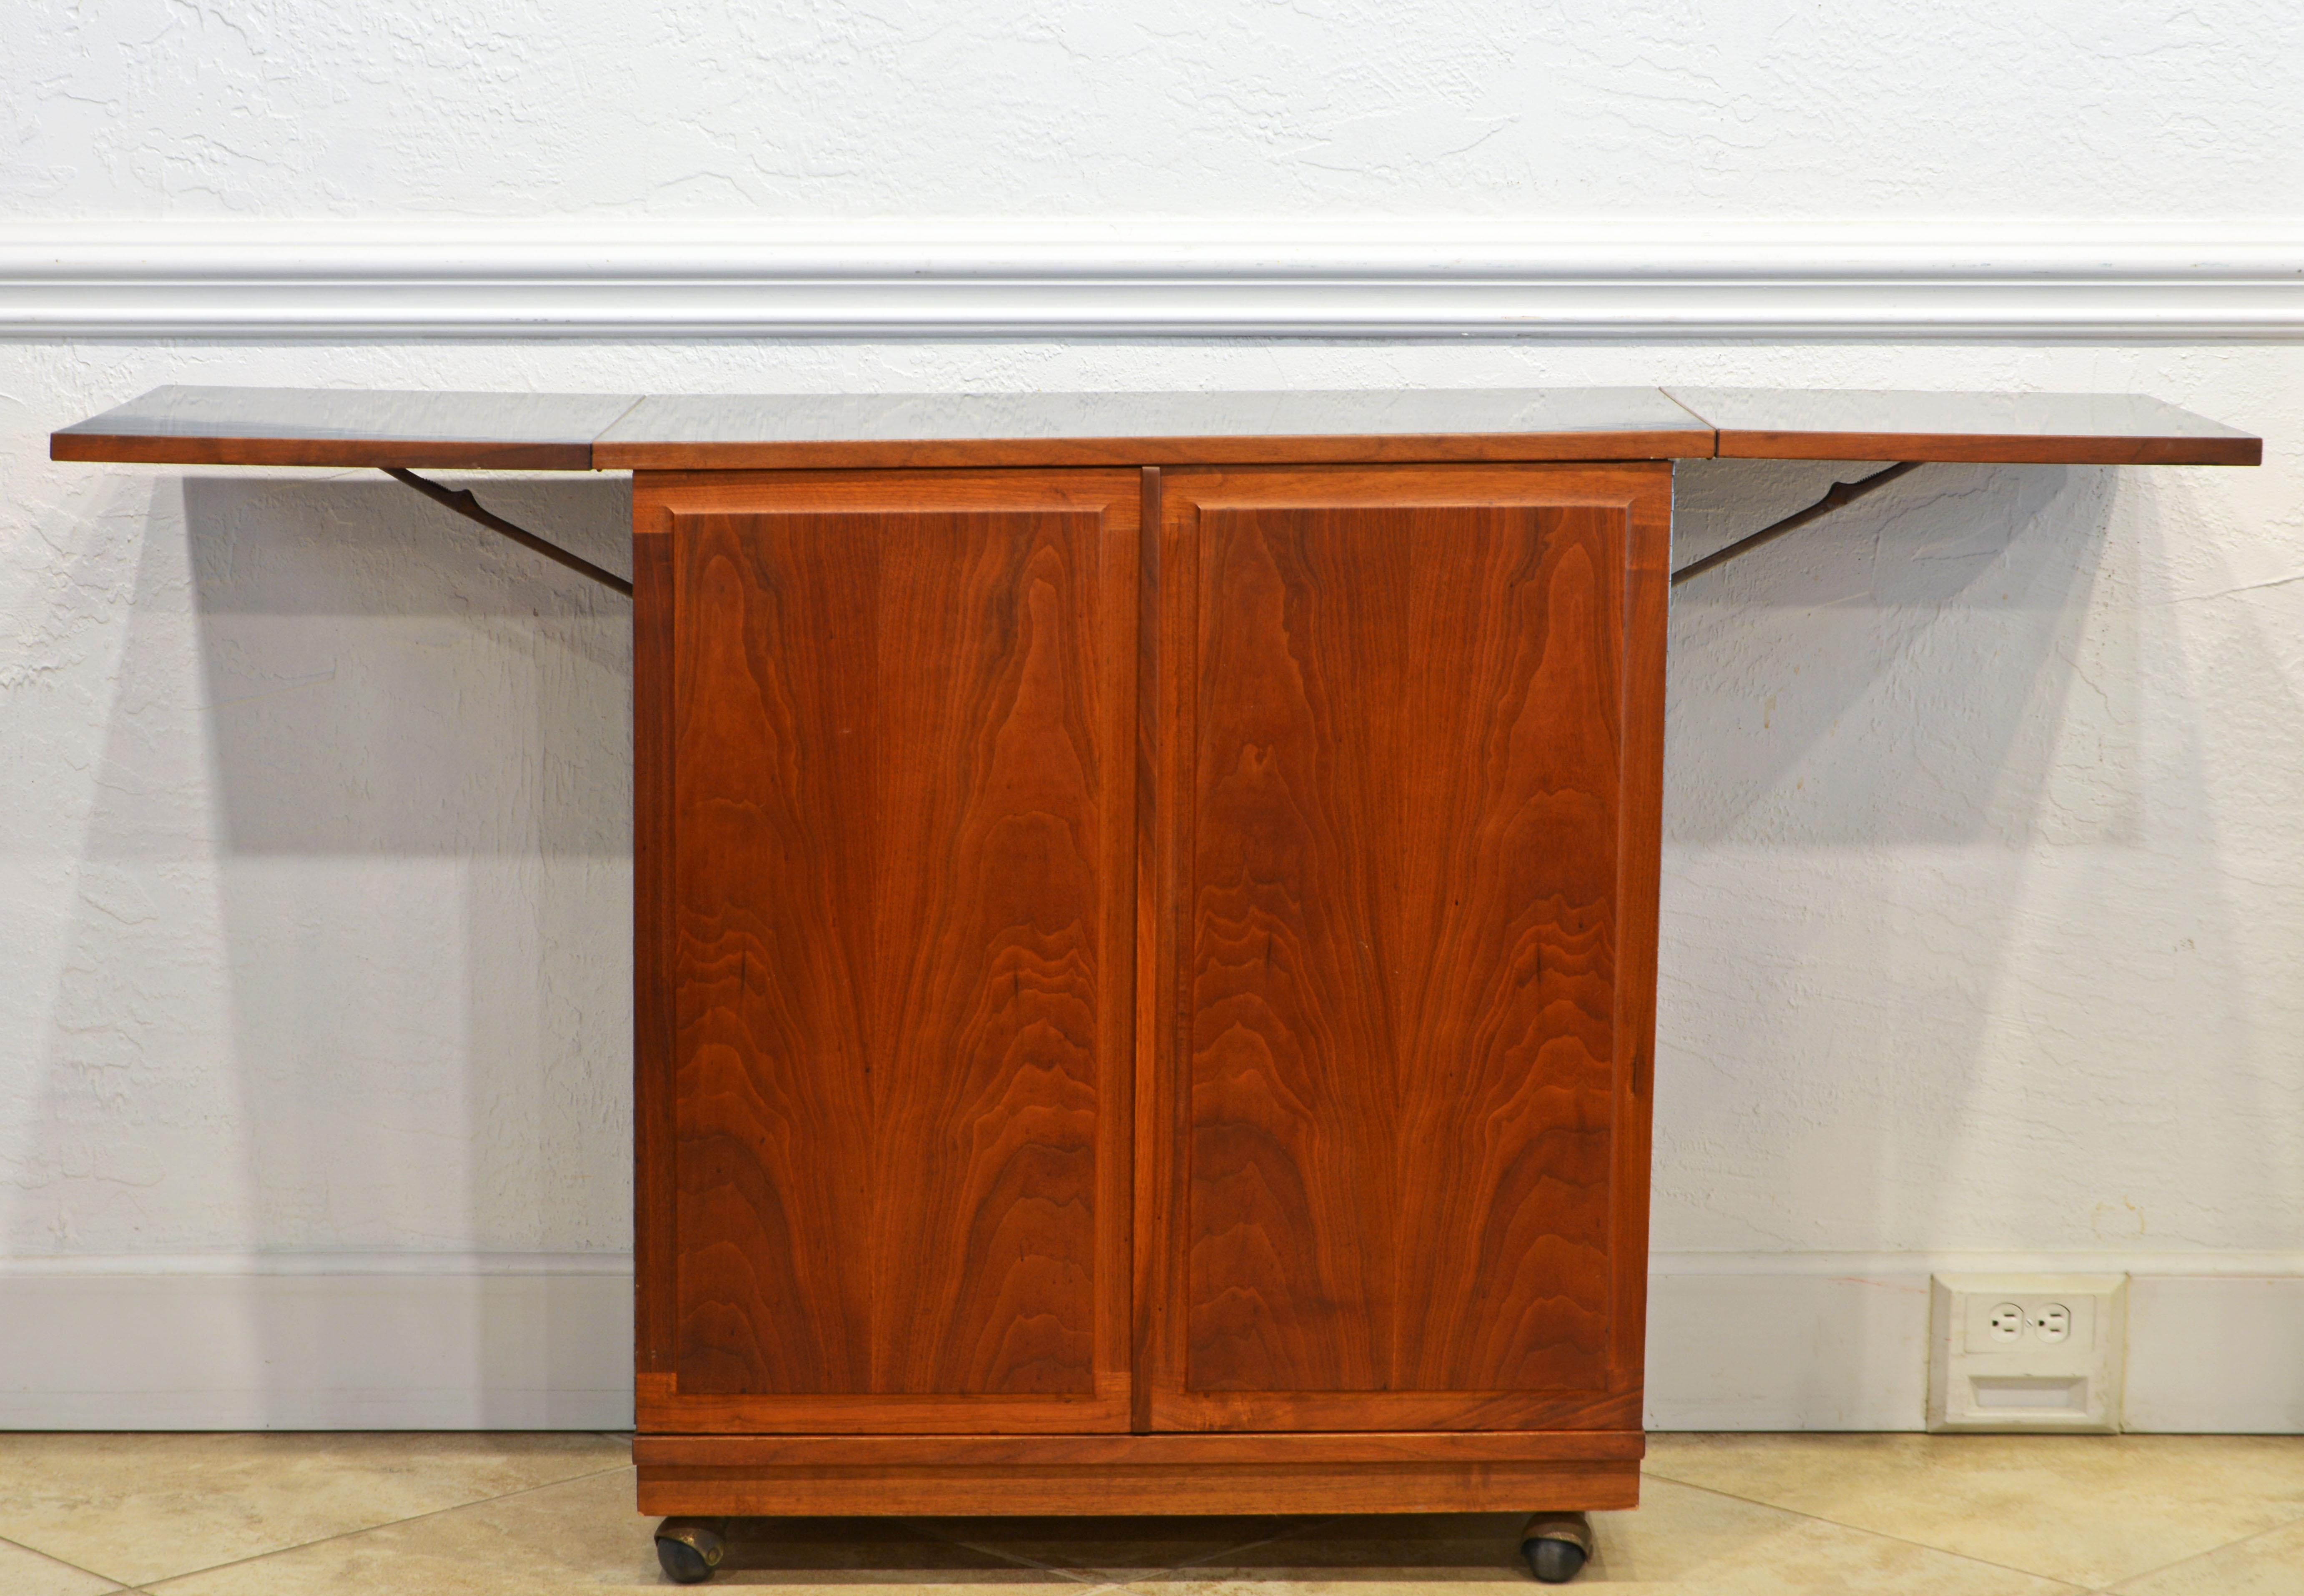 American Mid-Century Modern Expandable Walnut Bar Cart and Cabinet by Jack Cartwright